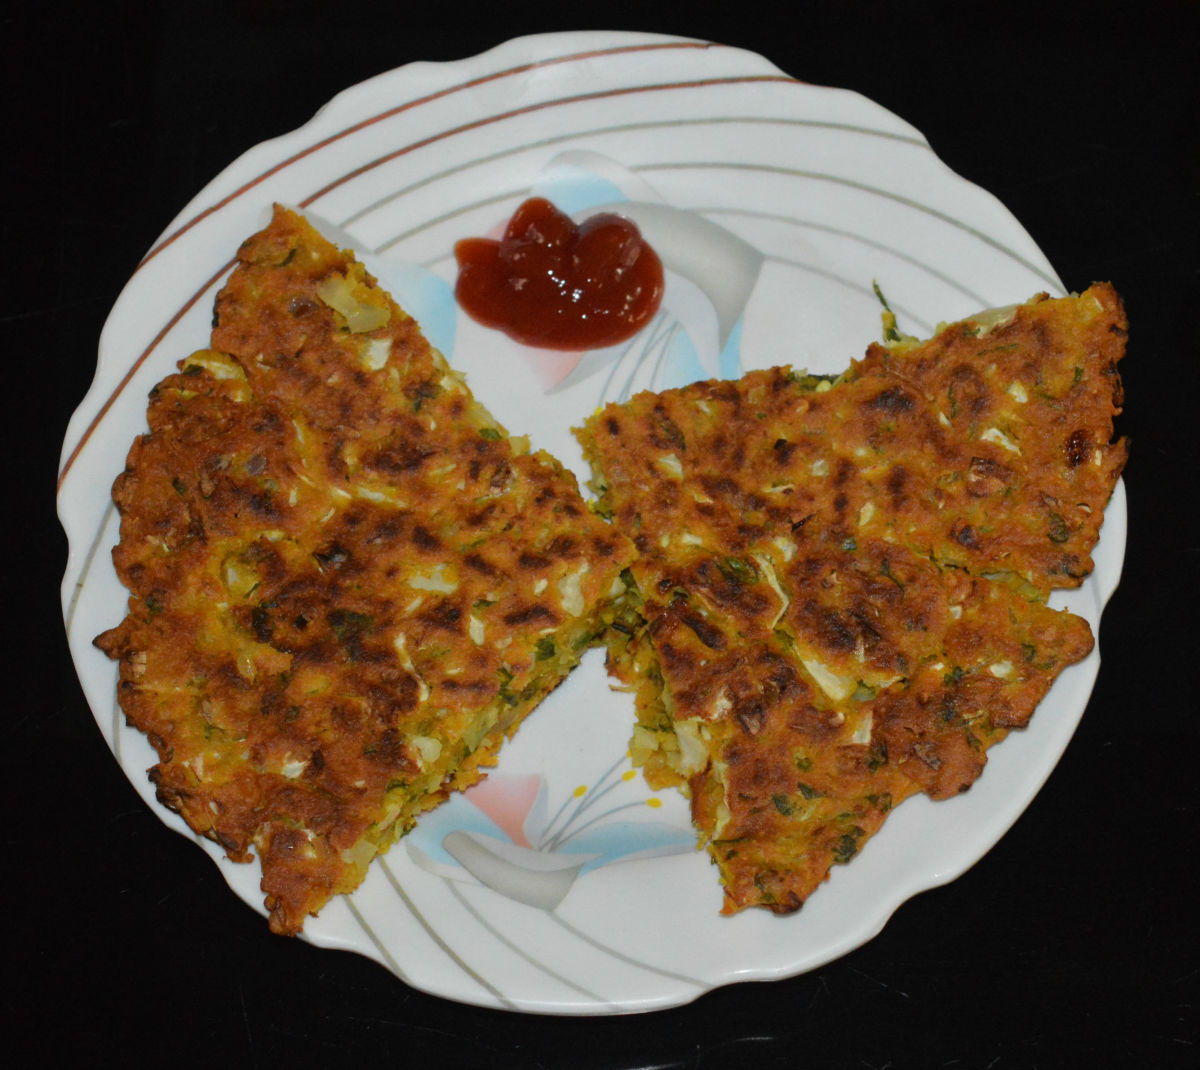 Crunchy and Delicious Cabbage Pancakes (Cabbage Bhanole)